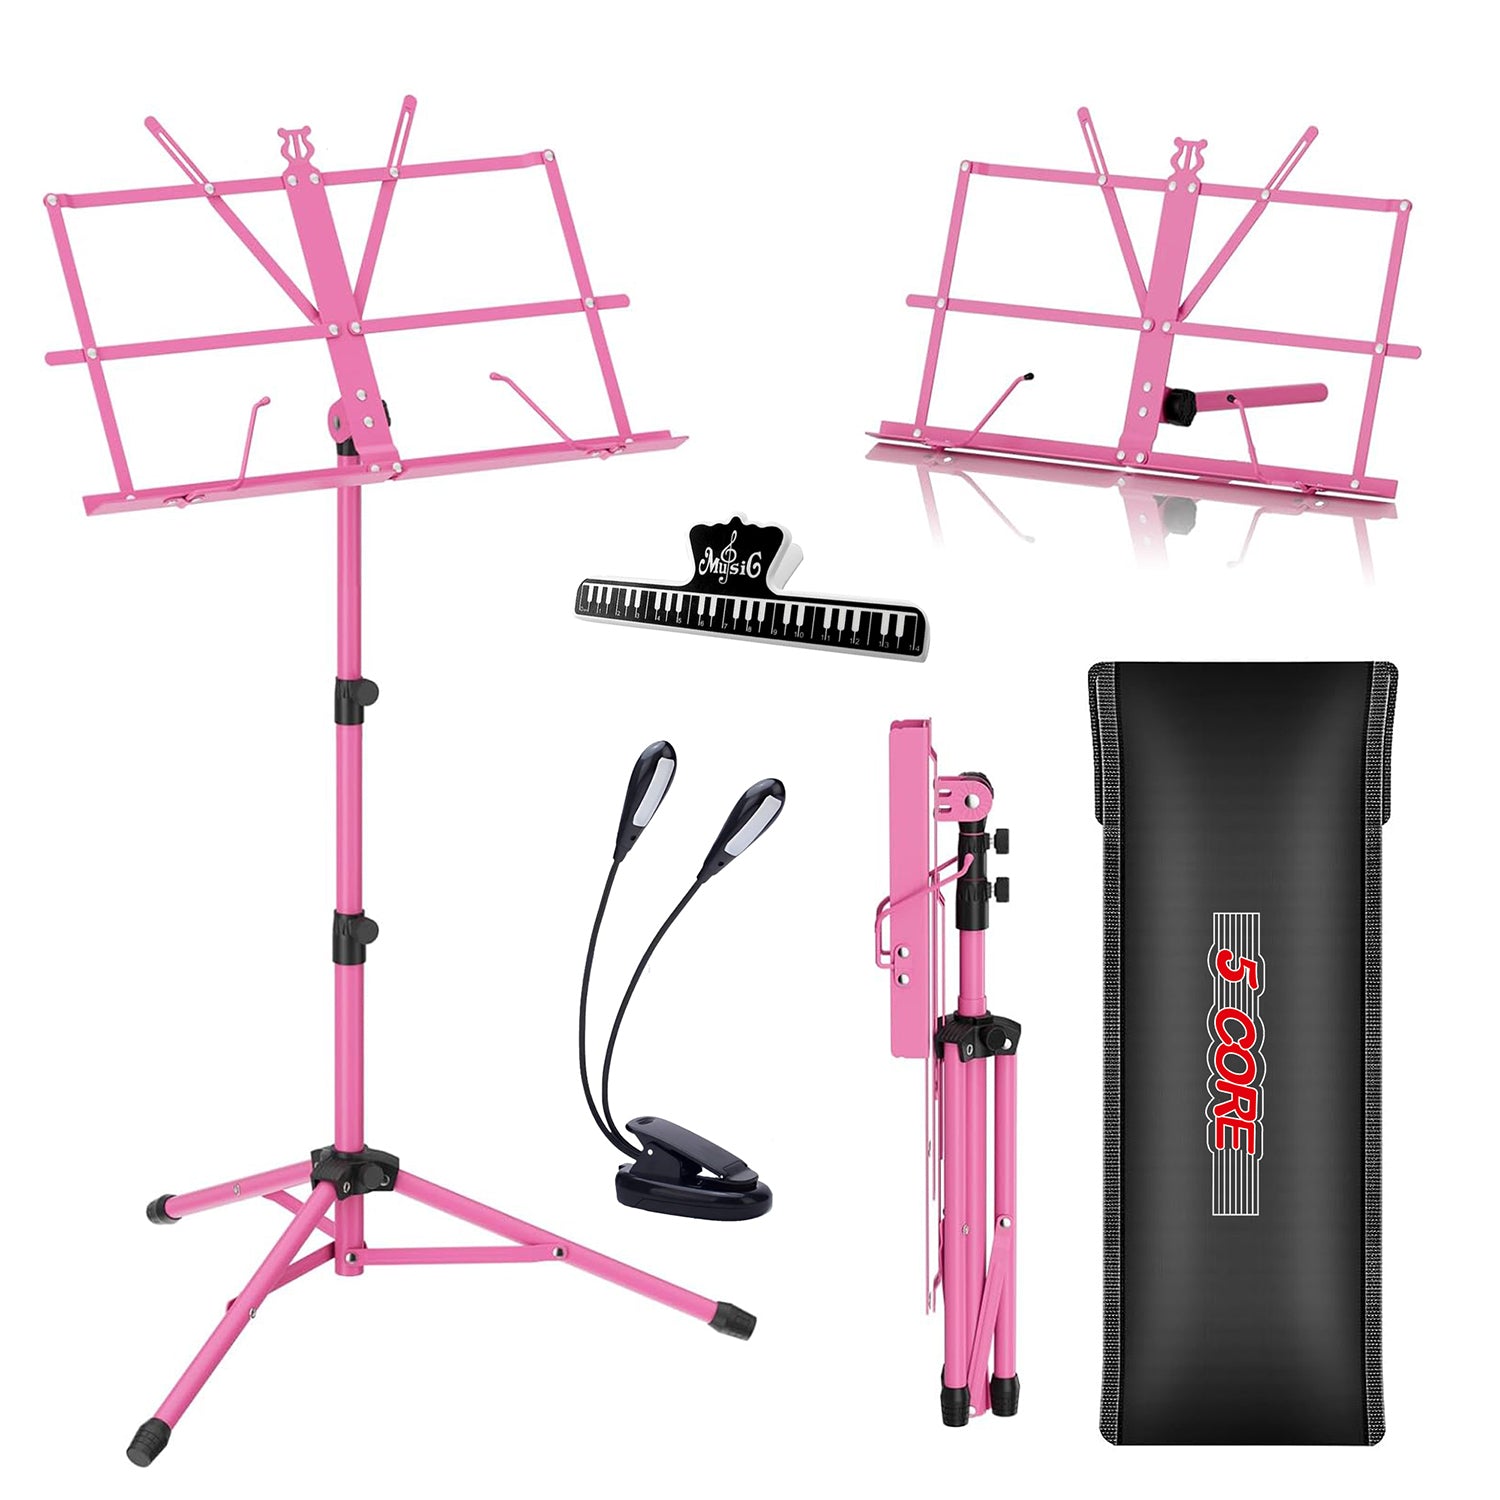 5 Core Music Stand For Sheet Music Professional Portable Adjustable Folding Music Note Holder Tripod Stands Pink